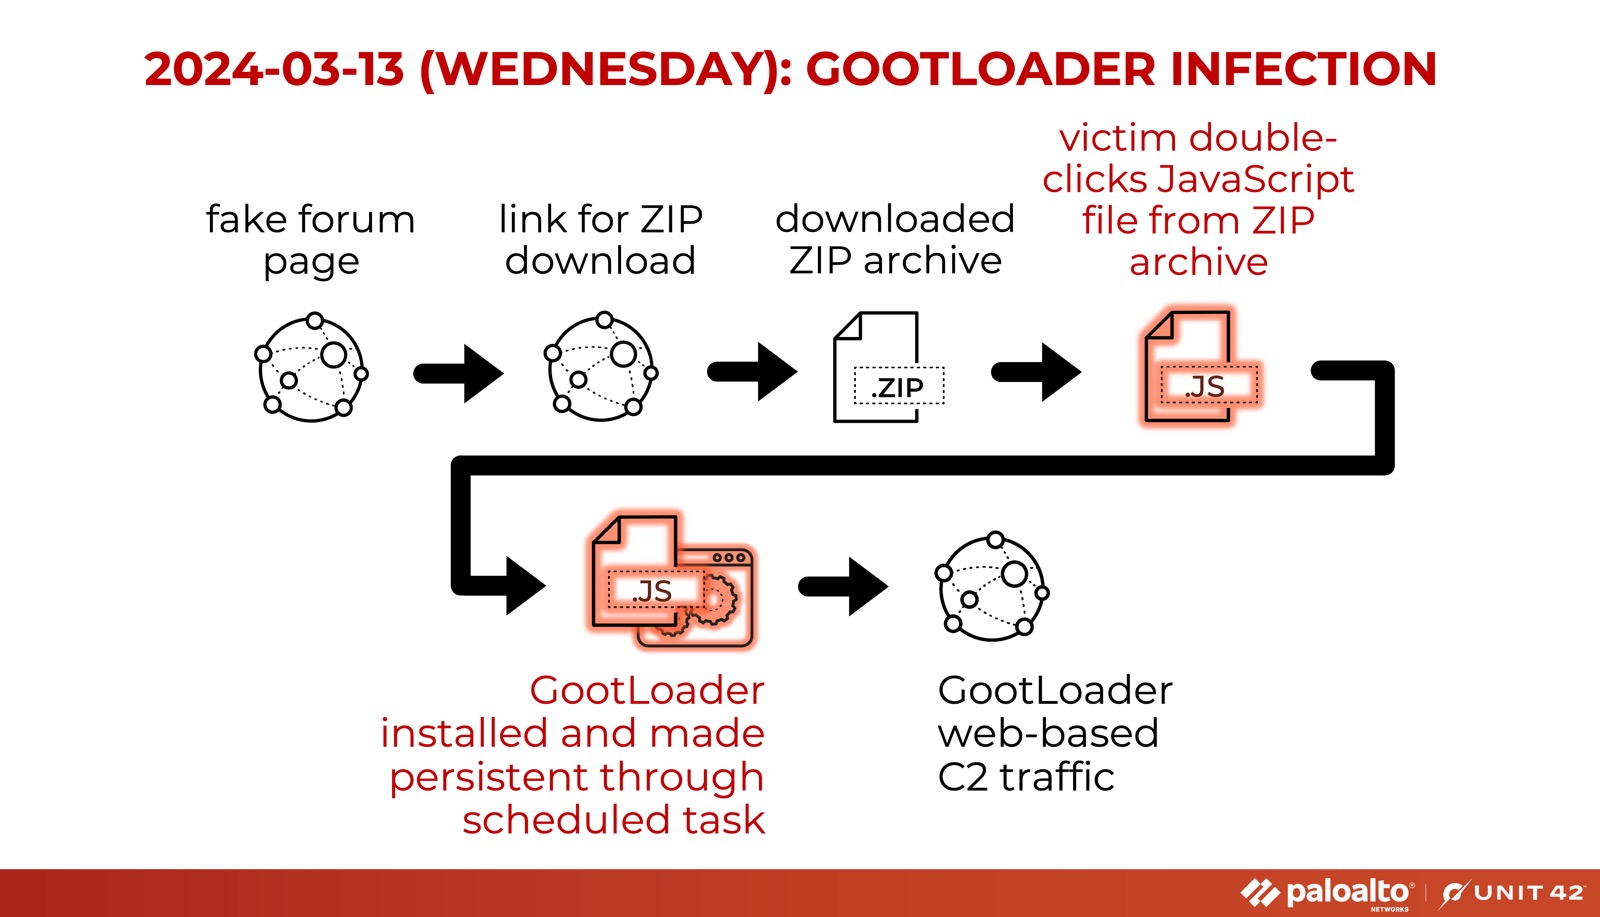 INFECTION CHAIN: fake forum page>link for ZIP download>downloaded ZIP archive>victim double-clicks JS file from ZIP>GootLoader installs and is made persistent through scheduled task>GootLoader web-based C2 traffic